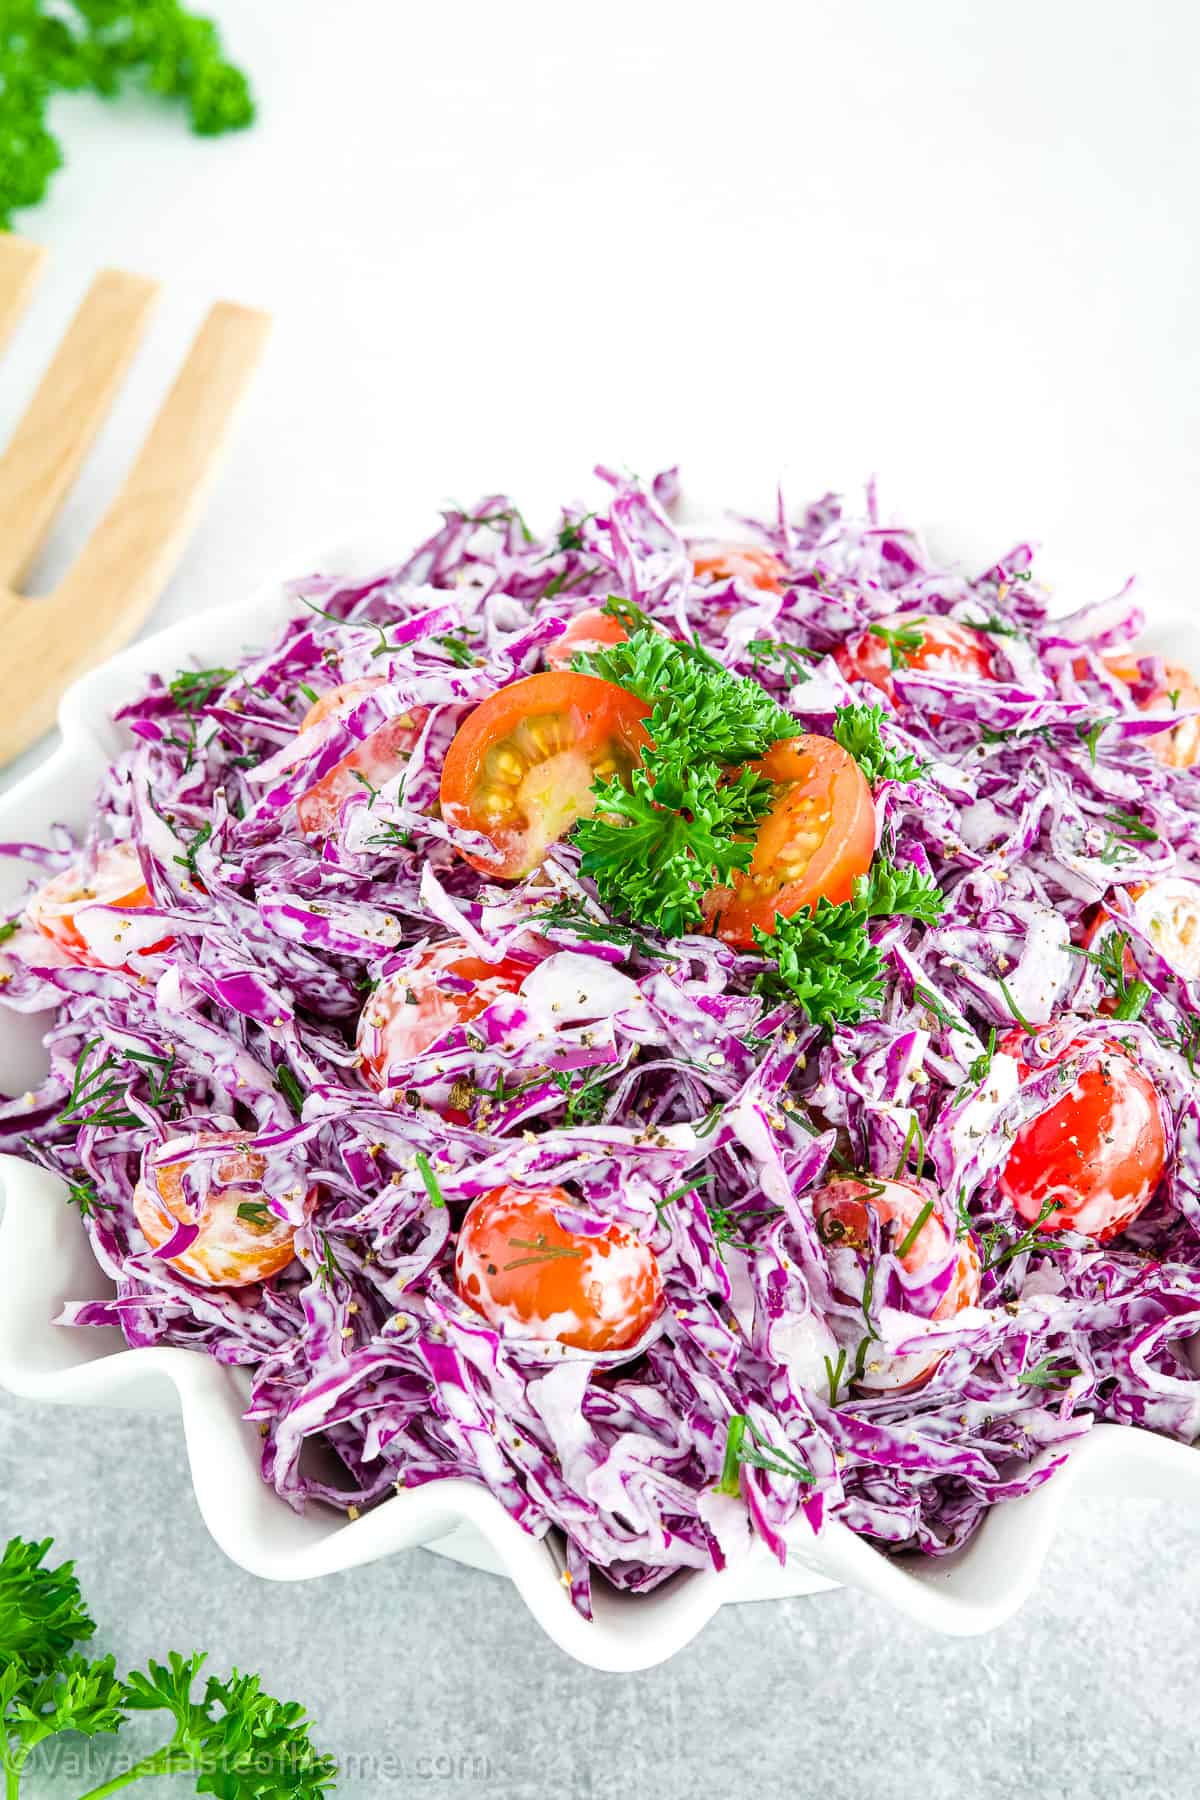 Not only is this purple cabbage salad delicious but it's also loaded with nutrients.